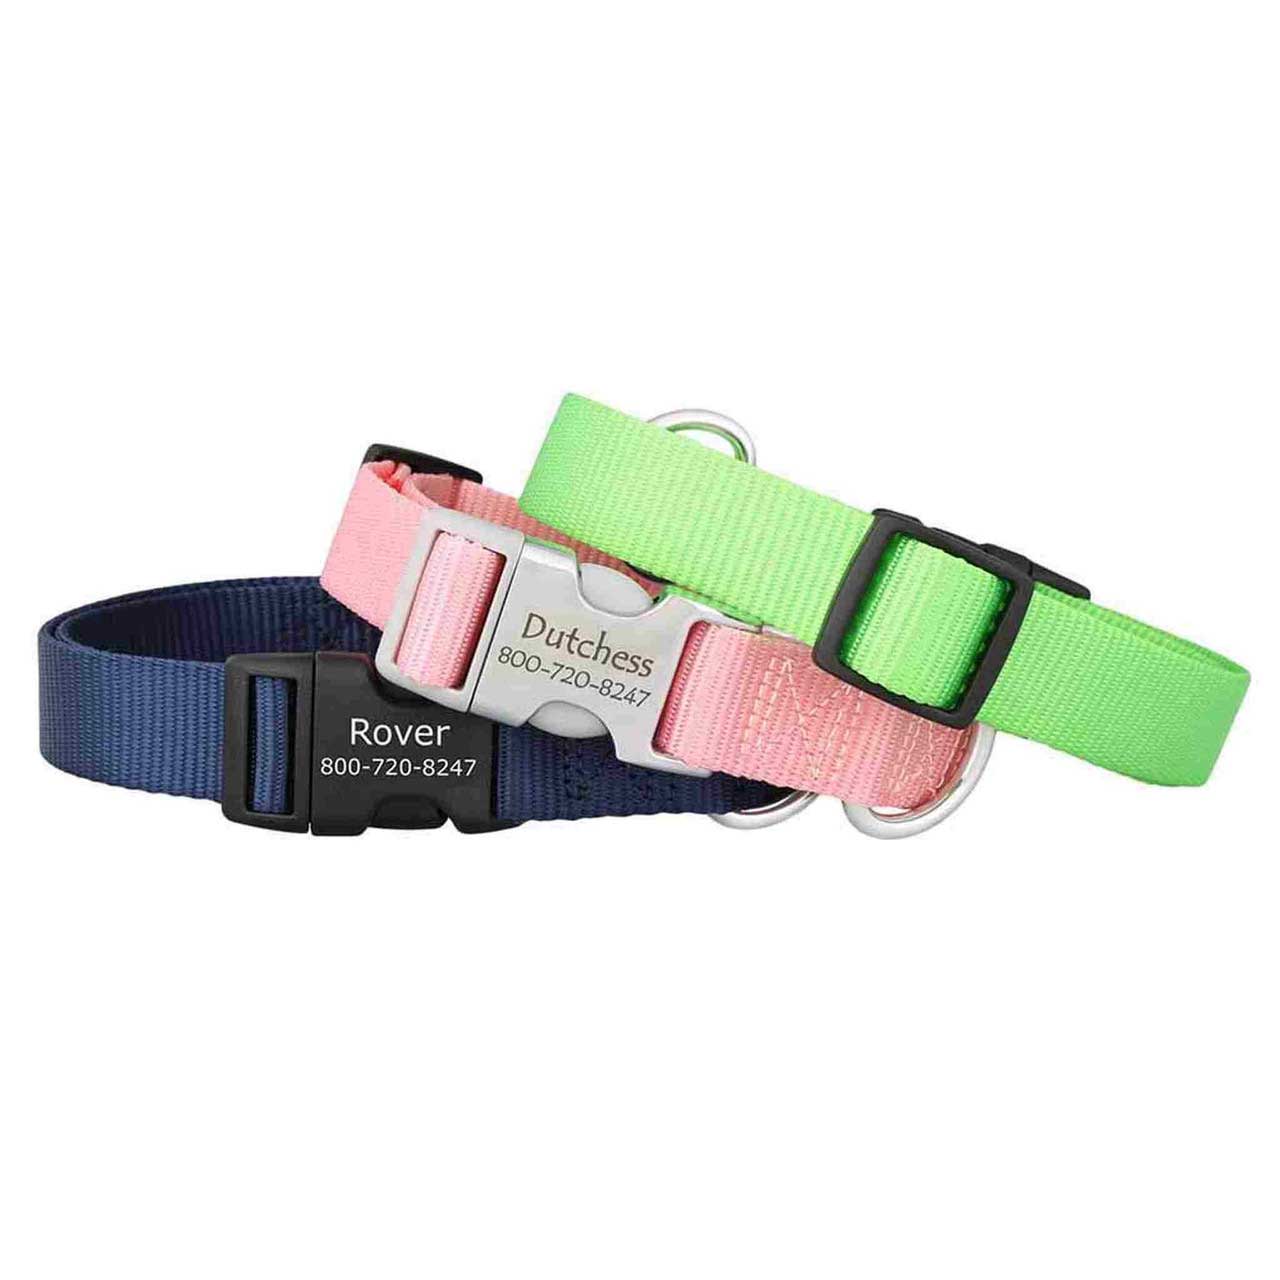 Personalized Buckle Nylon Dog Collar Group dogIDs